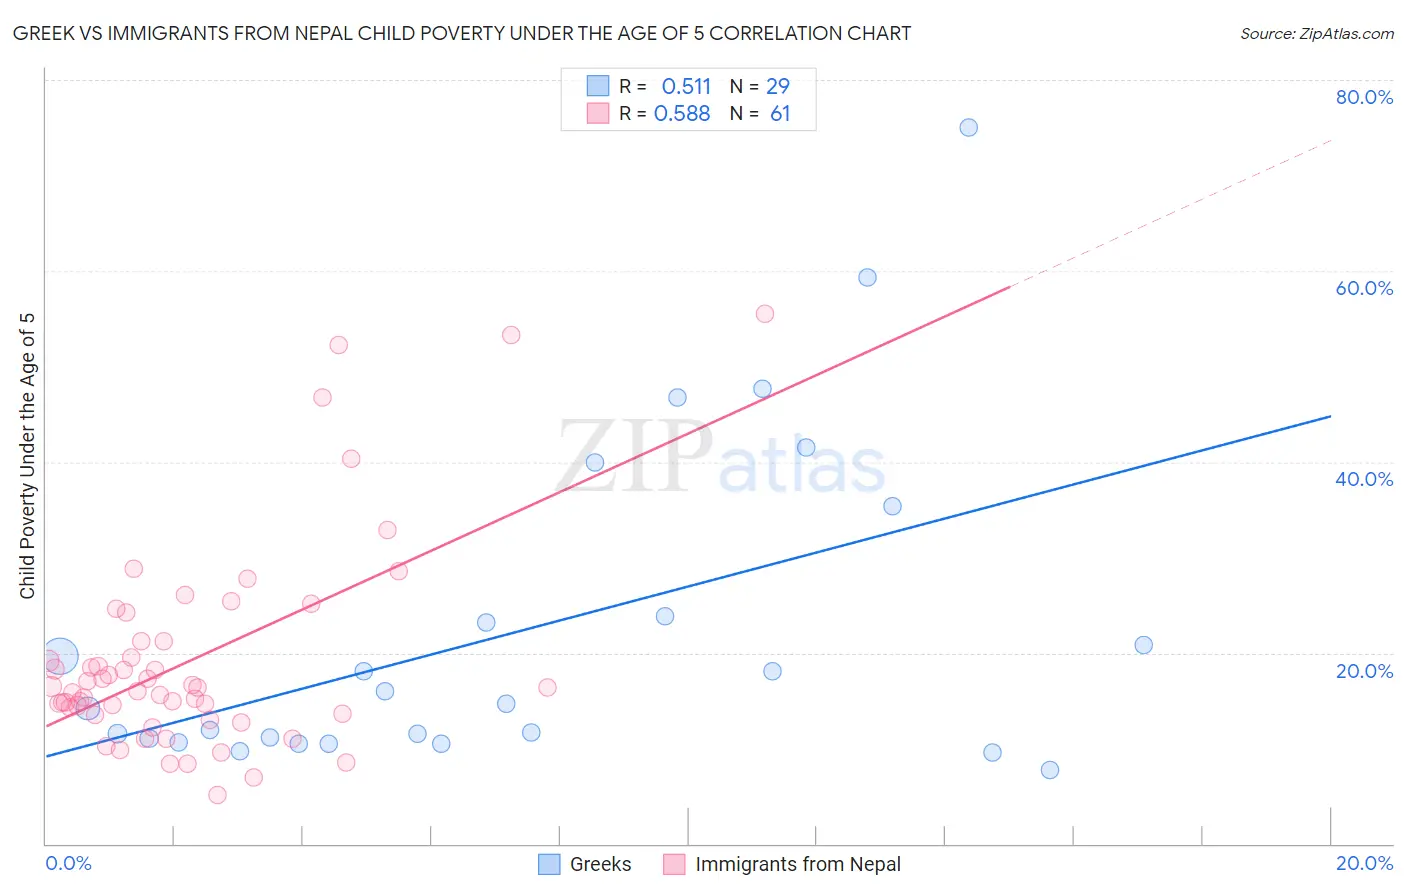 Greek vs Immigrants from Nepal Child Poverty Under the Age of 5